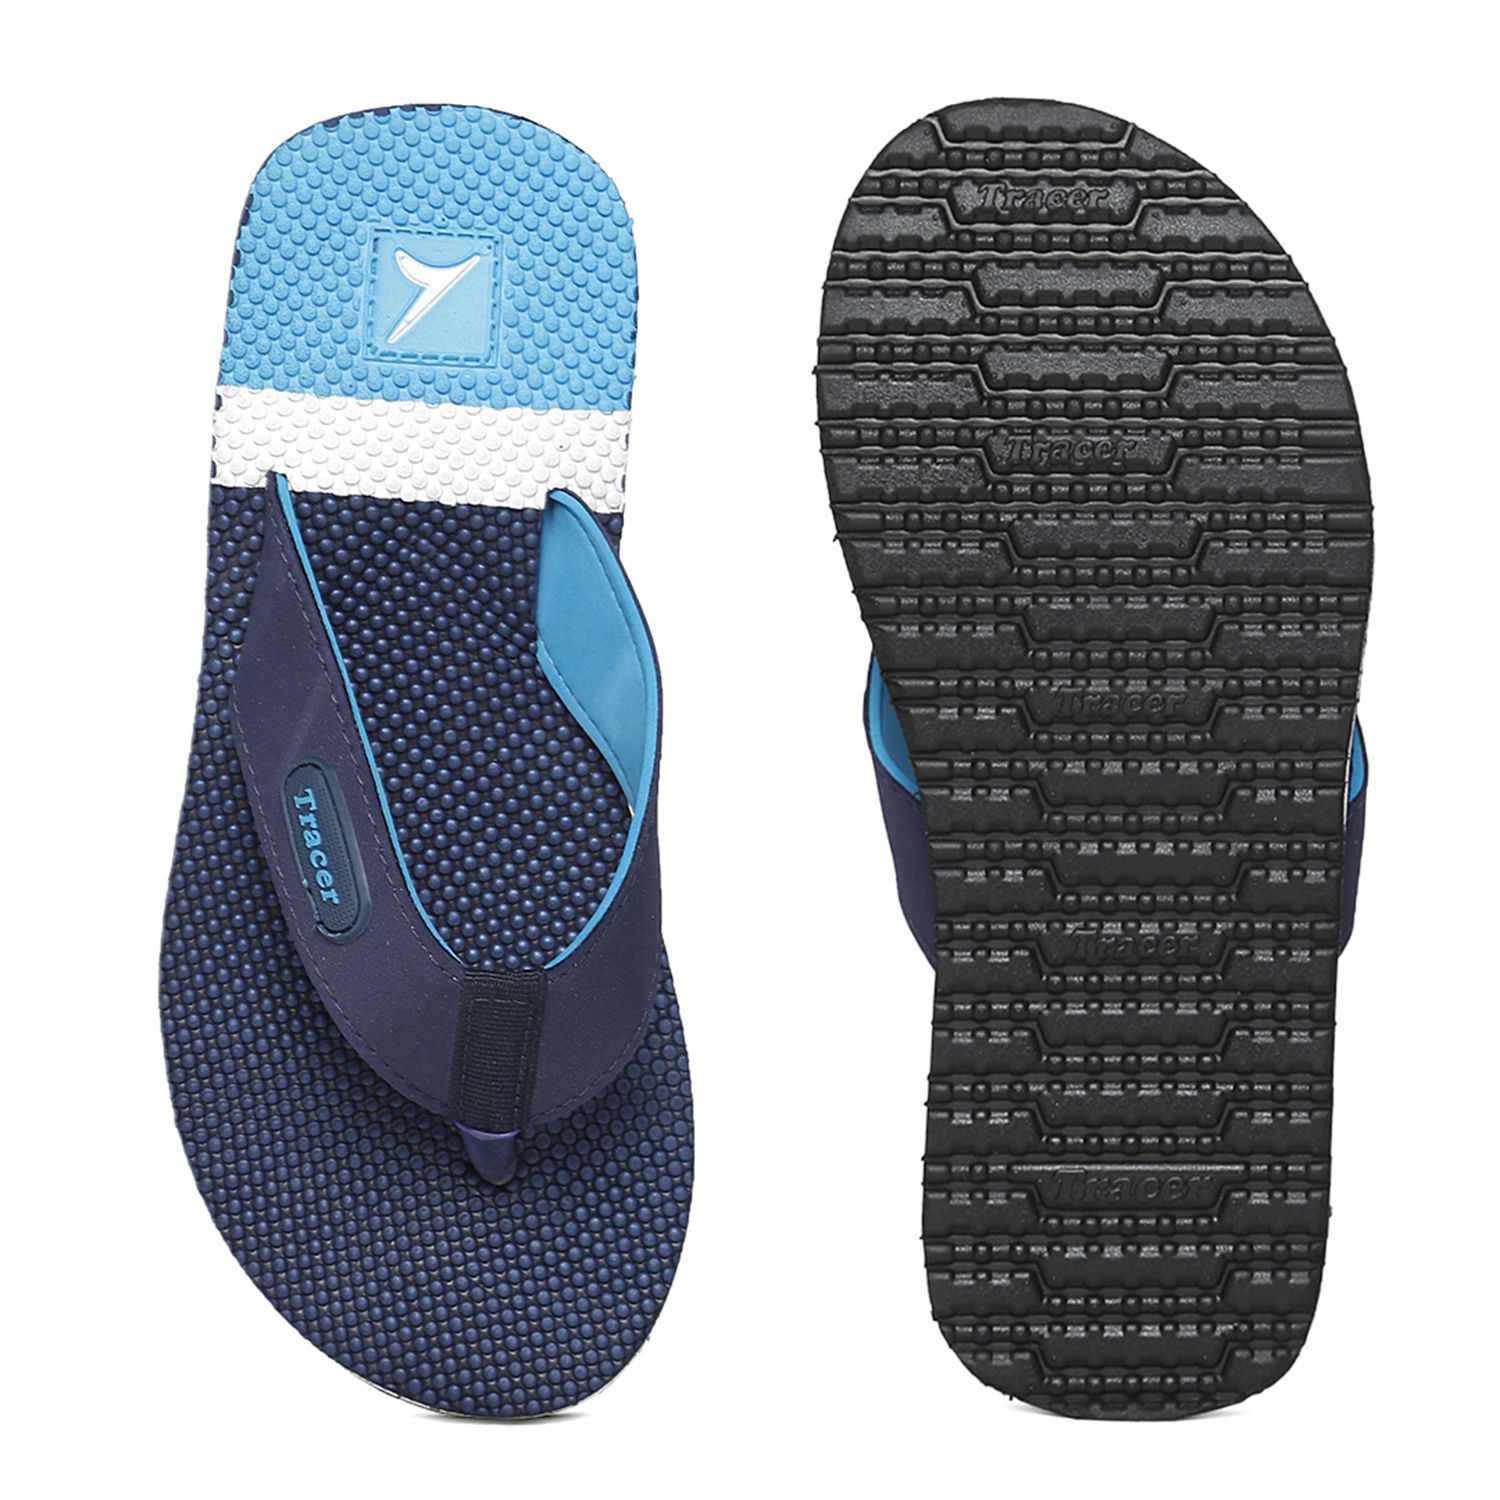 Tracer Navy Thong Flip Flop Price in India- Buy Tracer Navy Thong Flip ...